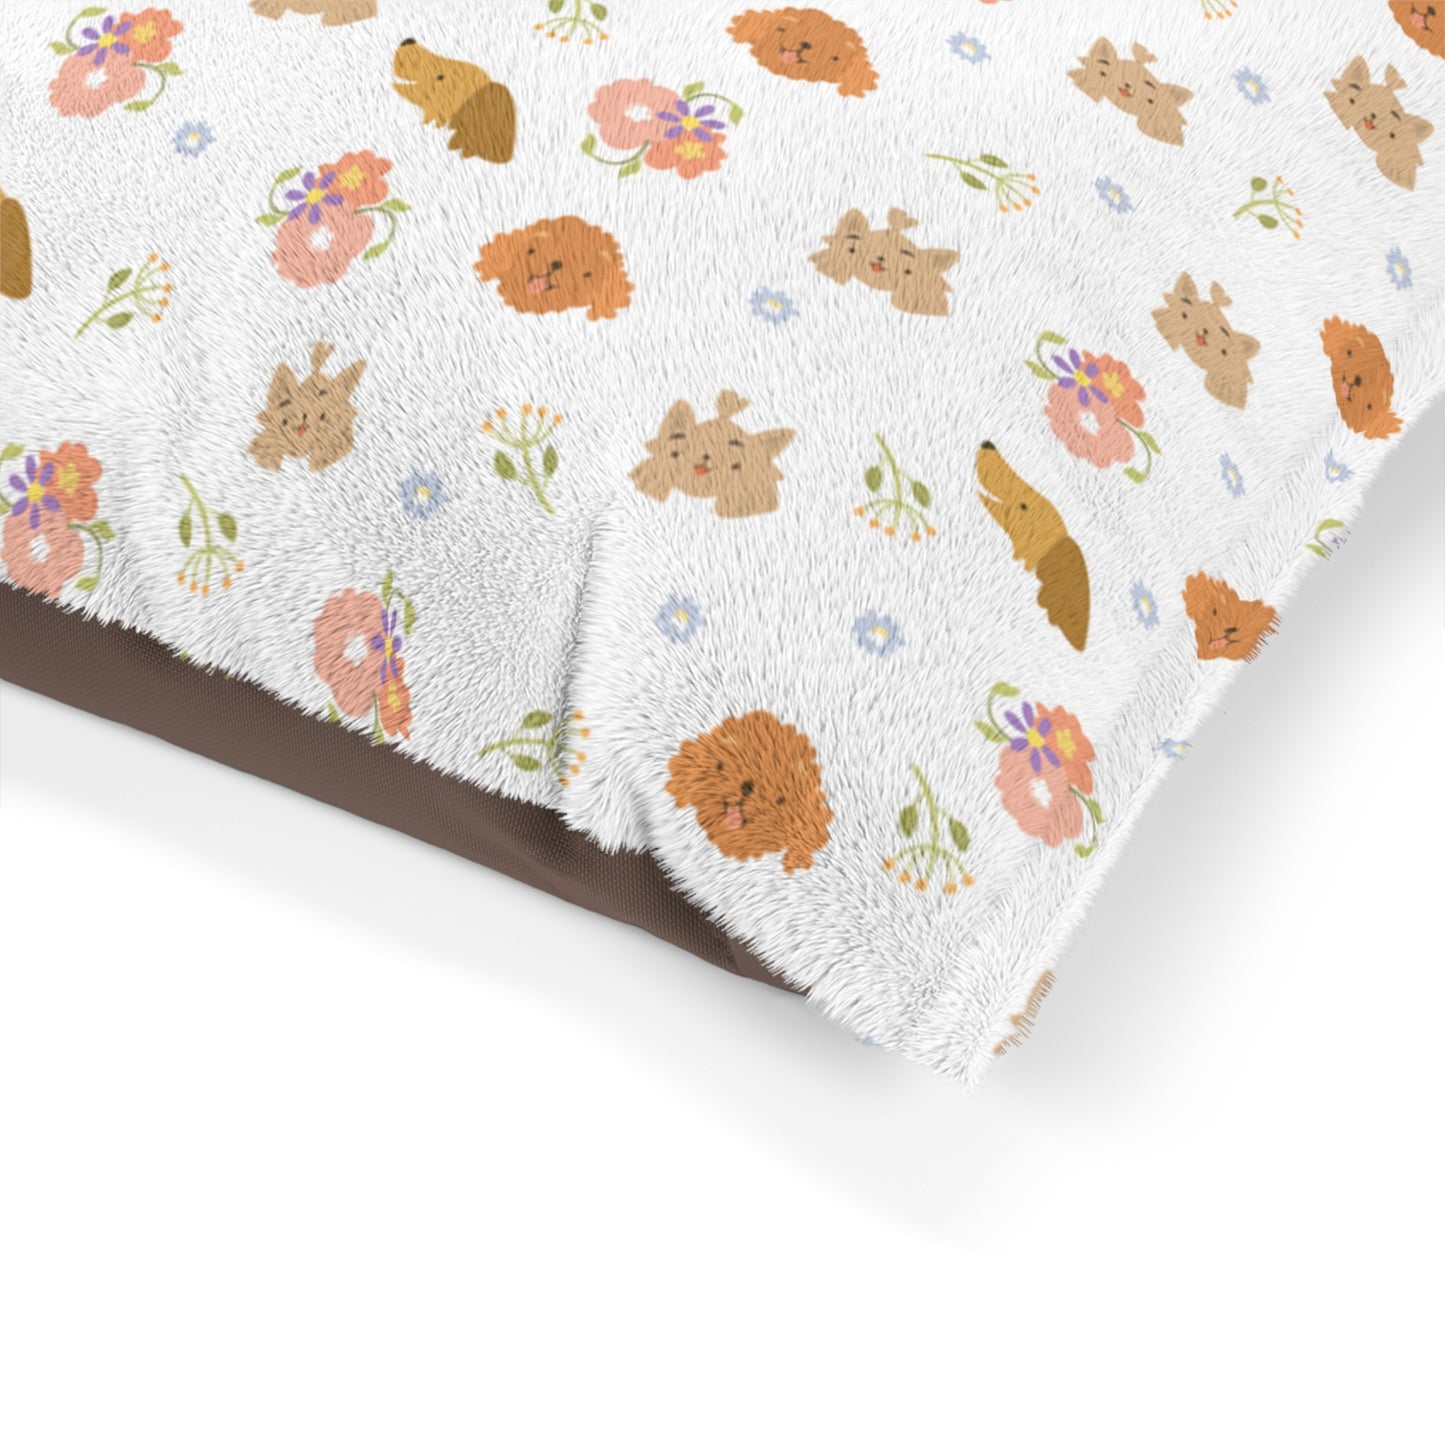 Niccie's Dog & Flowers Pattern Pet Bed - Comfy, Durable, Stylish